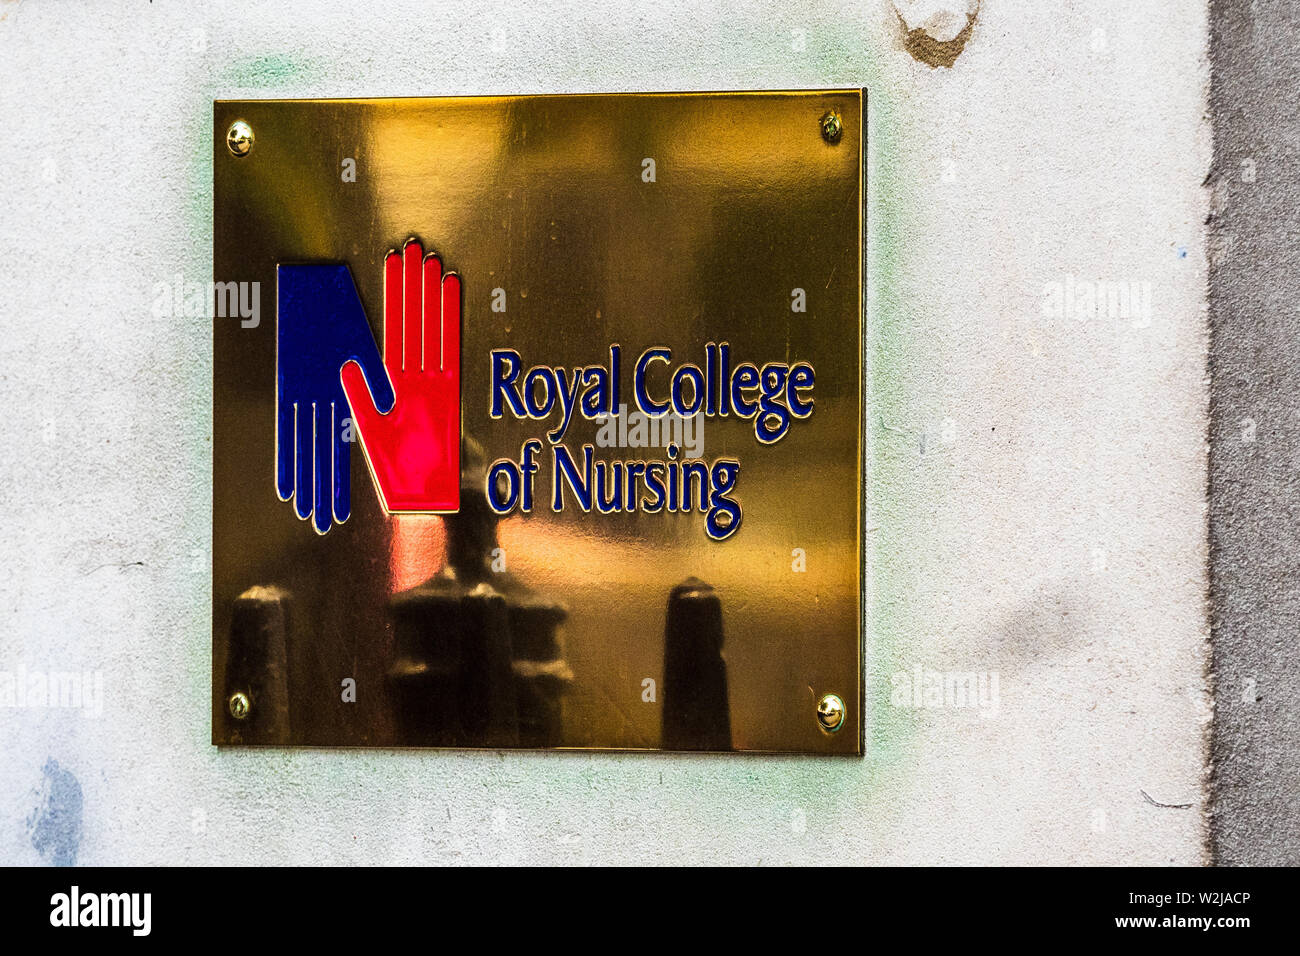 Royal College of Nursing - RCN London - sign outside the headquarters of the Royal College of Nursing at 20 Cavendish Square in Central London UK Stock Photo